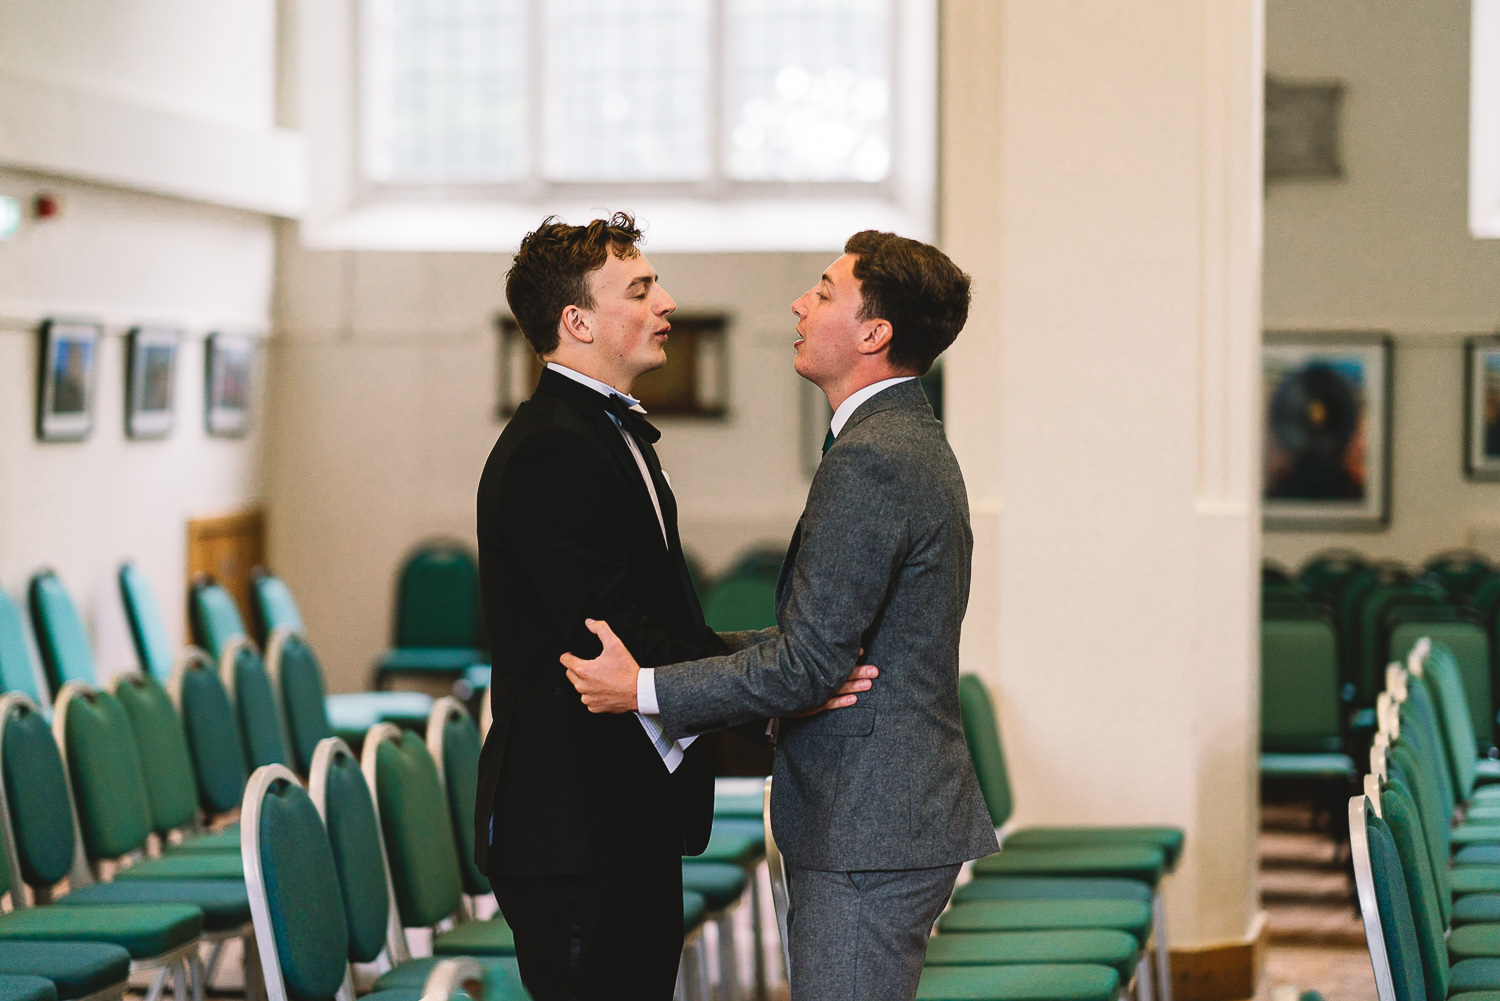 Photo inside of wedding venue of the Groom doing breathing exercises with one of his Groomsmen to calm the nerves before the wedding ceremony